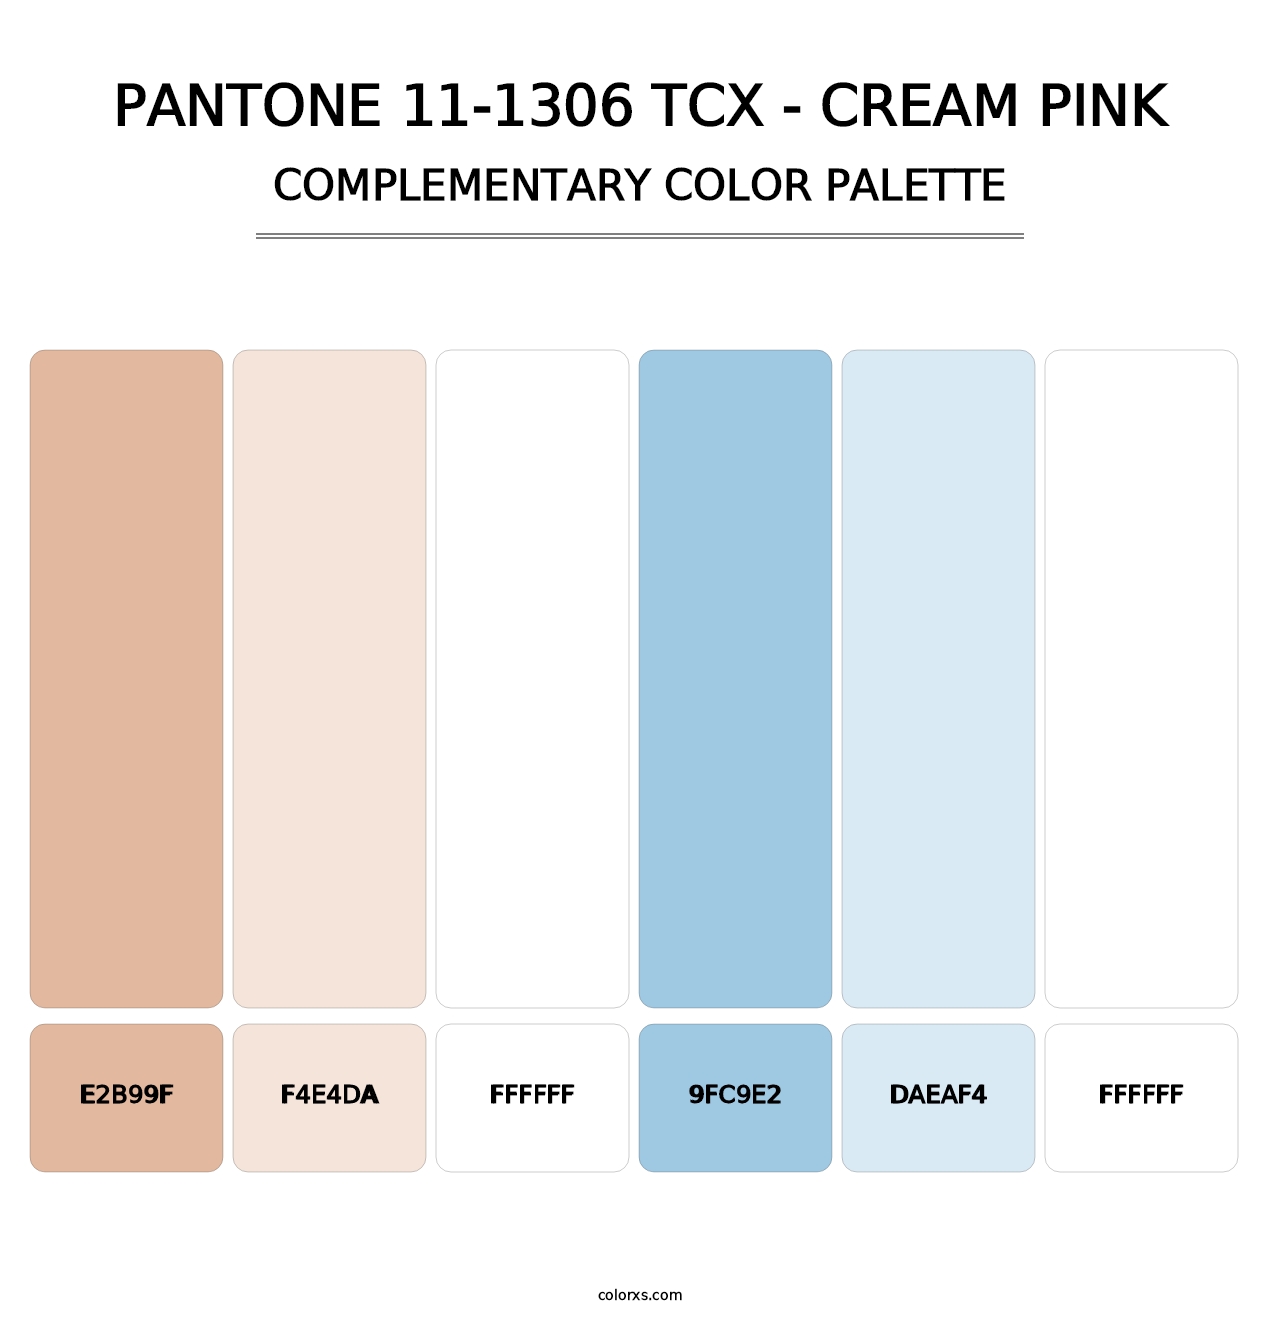 PANTONE 11-1306 TCX - Cream Pink - Complementary Color Palette